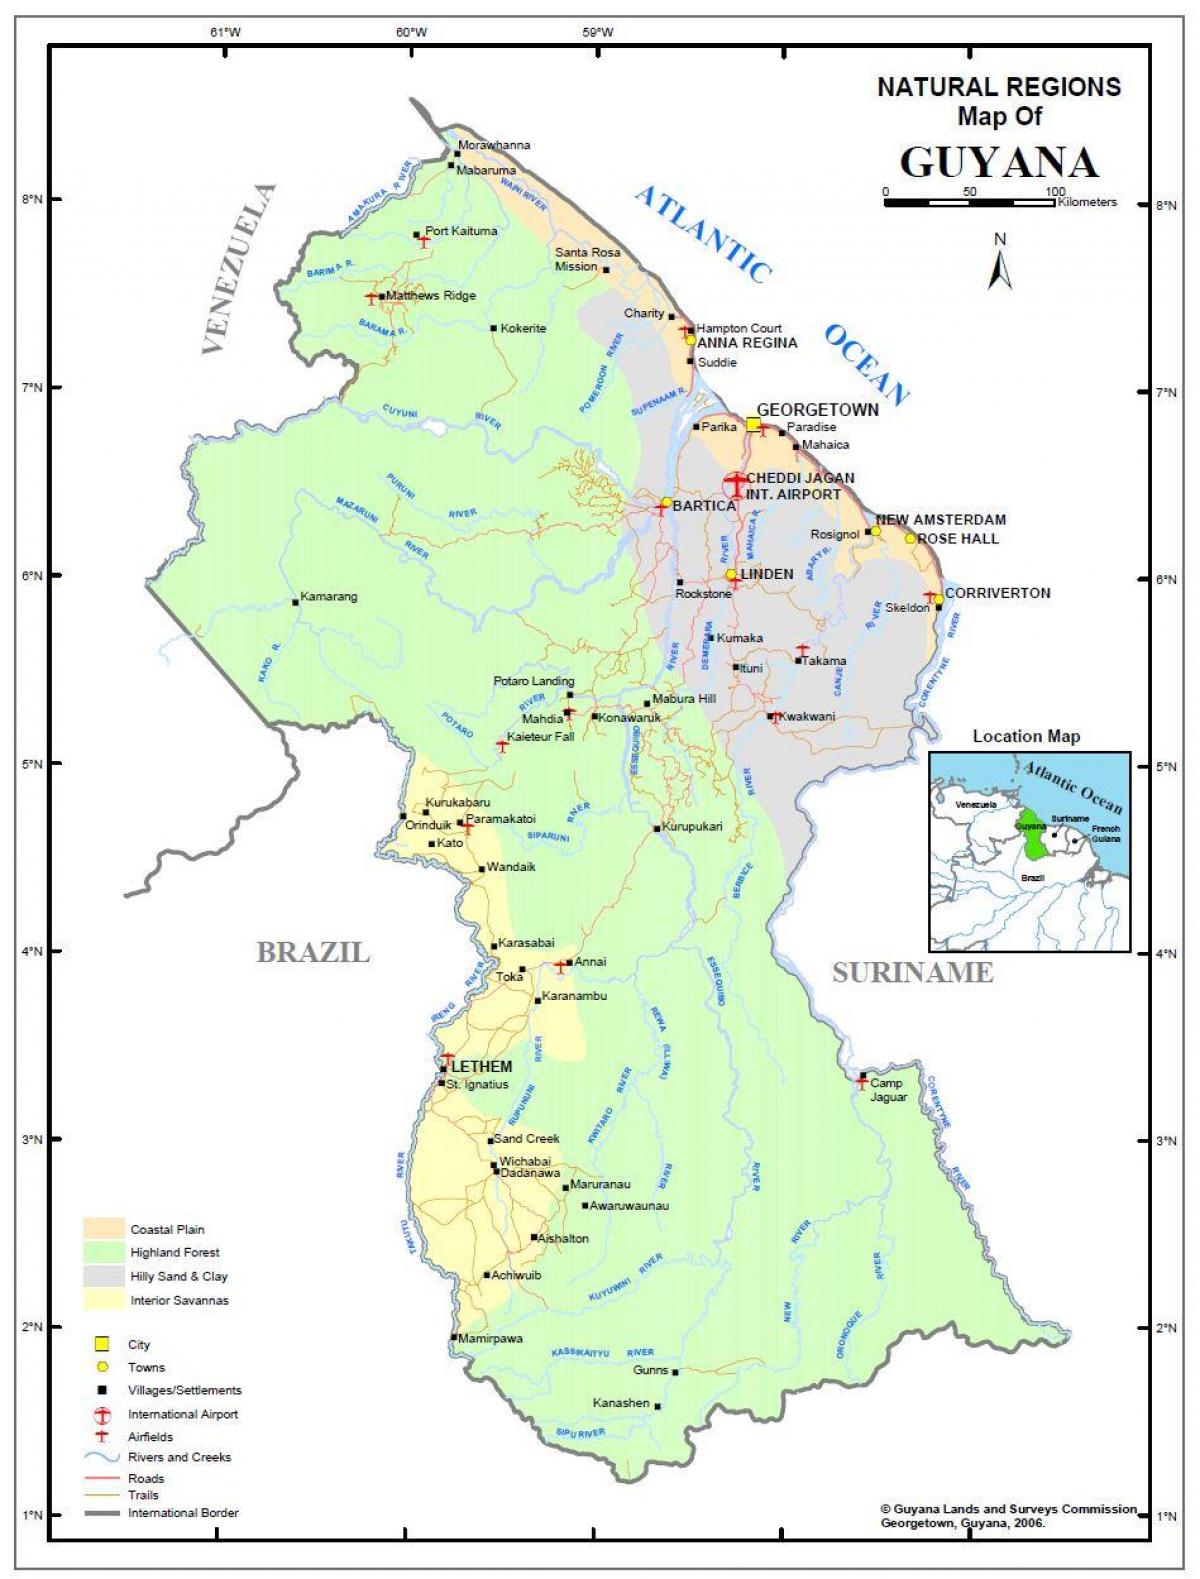 Map Of Guyana Showing Natural Regions Map Of Guyana Showing The Four Natural Regions - Map Of Guyana Showing The  4 Natural Regions (South America - Americas)